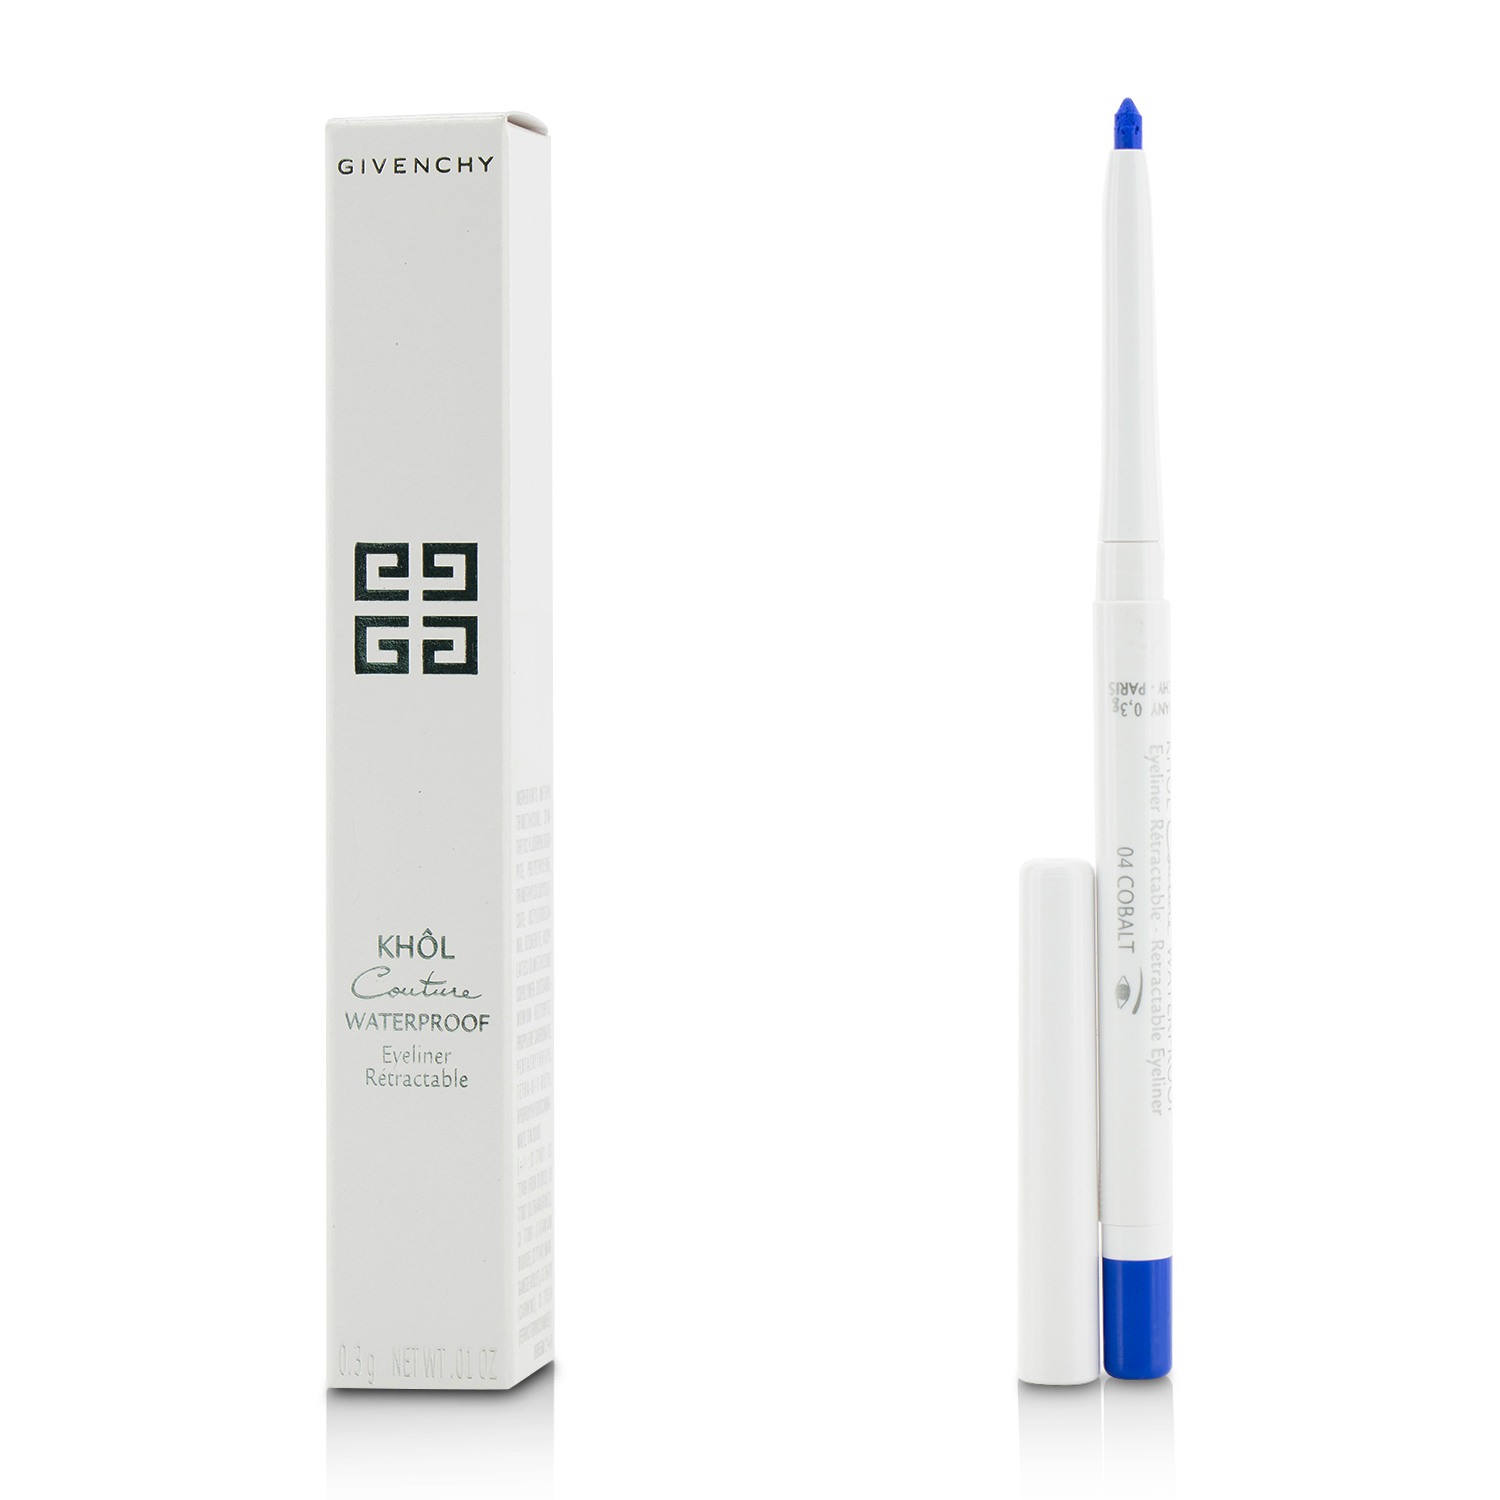 Khol Couture Waterproof Retractable Eyeliner - # 04 Cobalt Givenchy Image